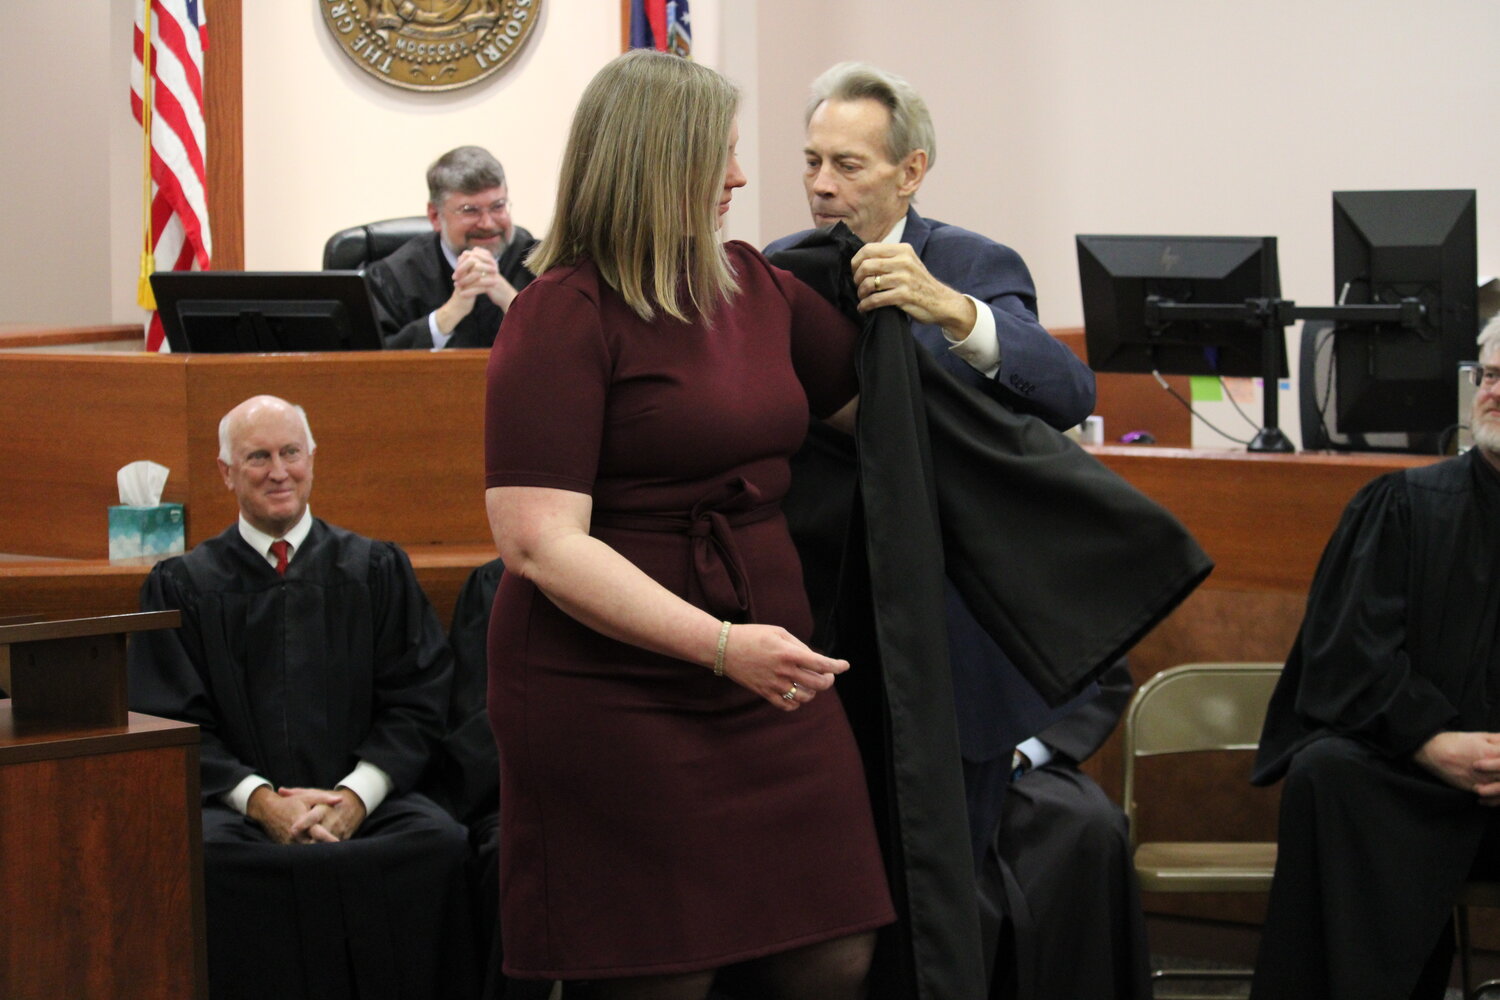 Katie Joyce receives her judges robe from her father, retired attorney Tim Joyce, during the ceremony.